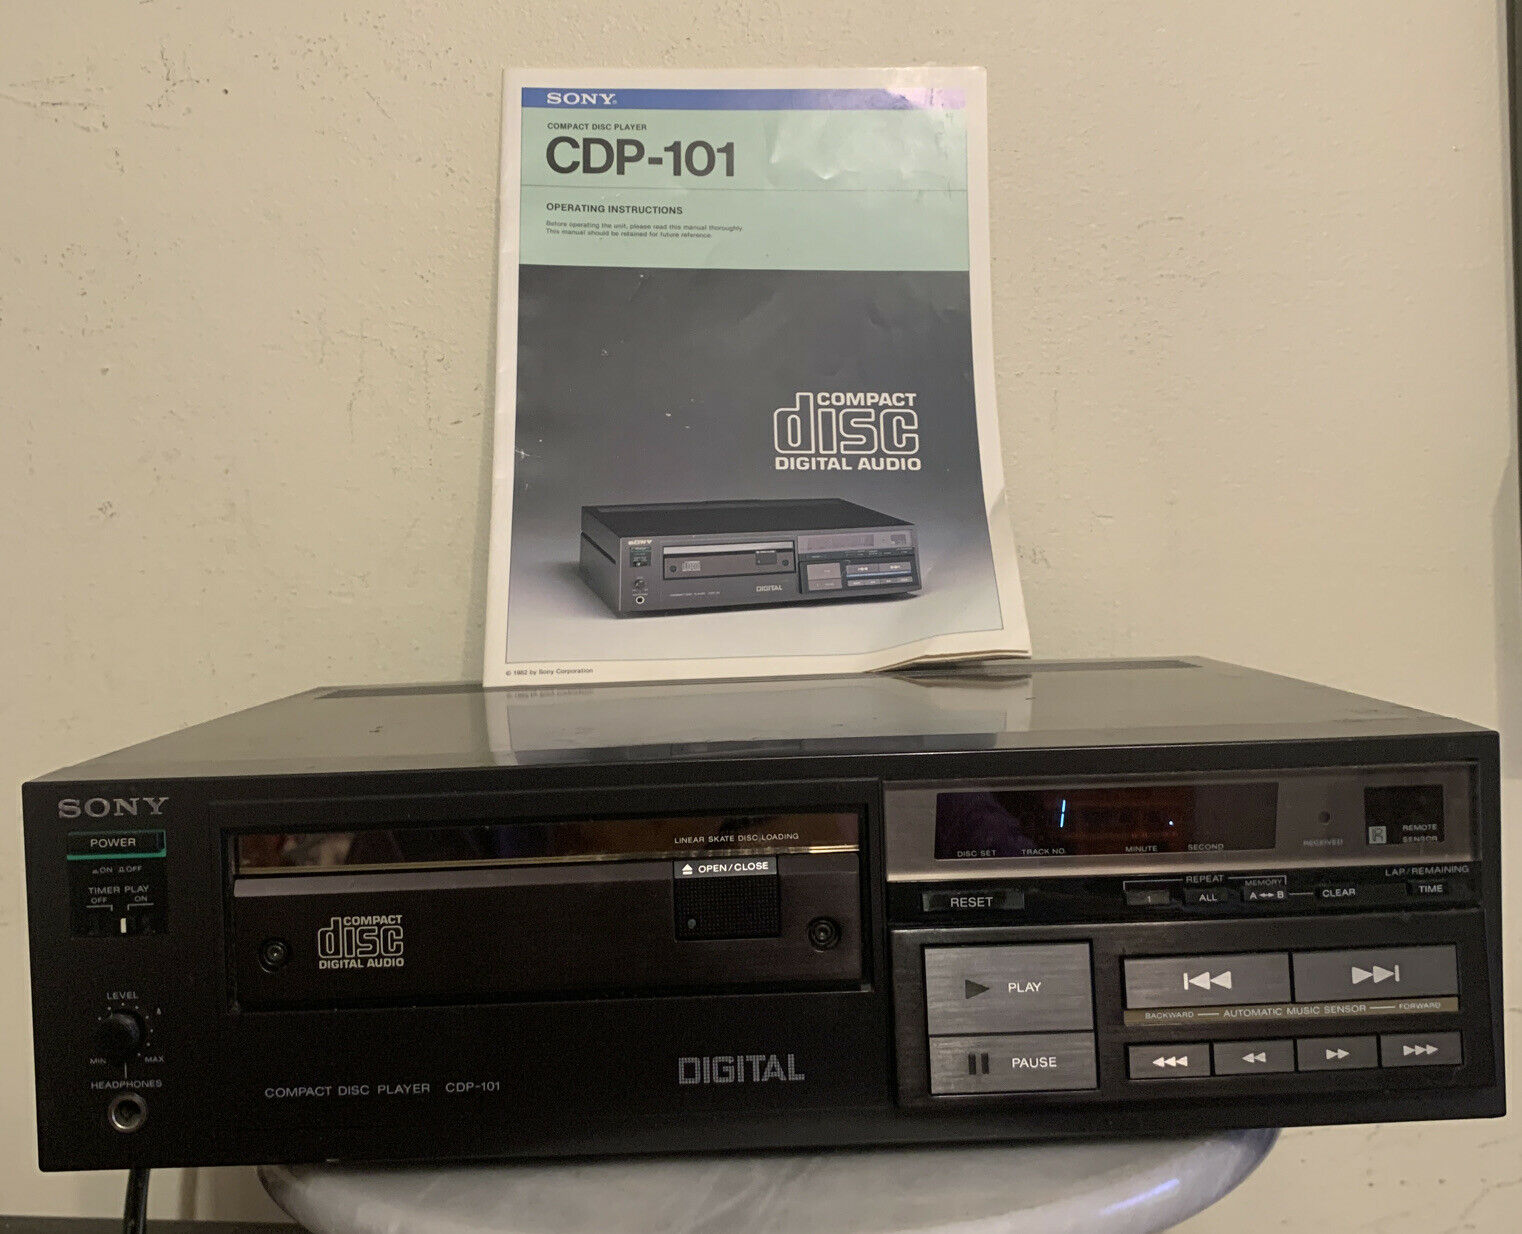 Vtg Sony Cd Player Cdp-101 Early Commercial Parts Or Repair Manual Rare Htf 1983